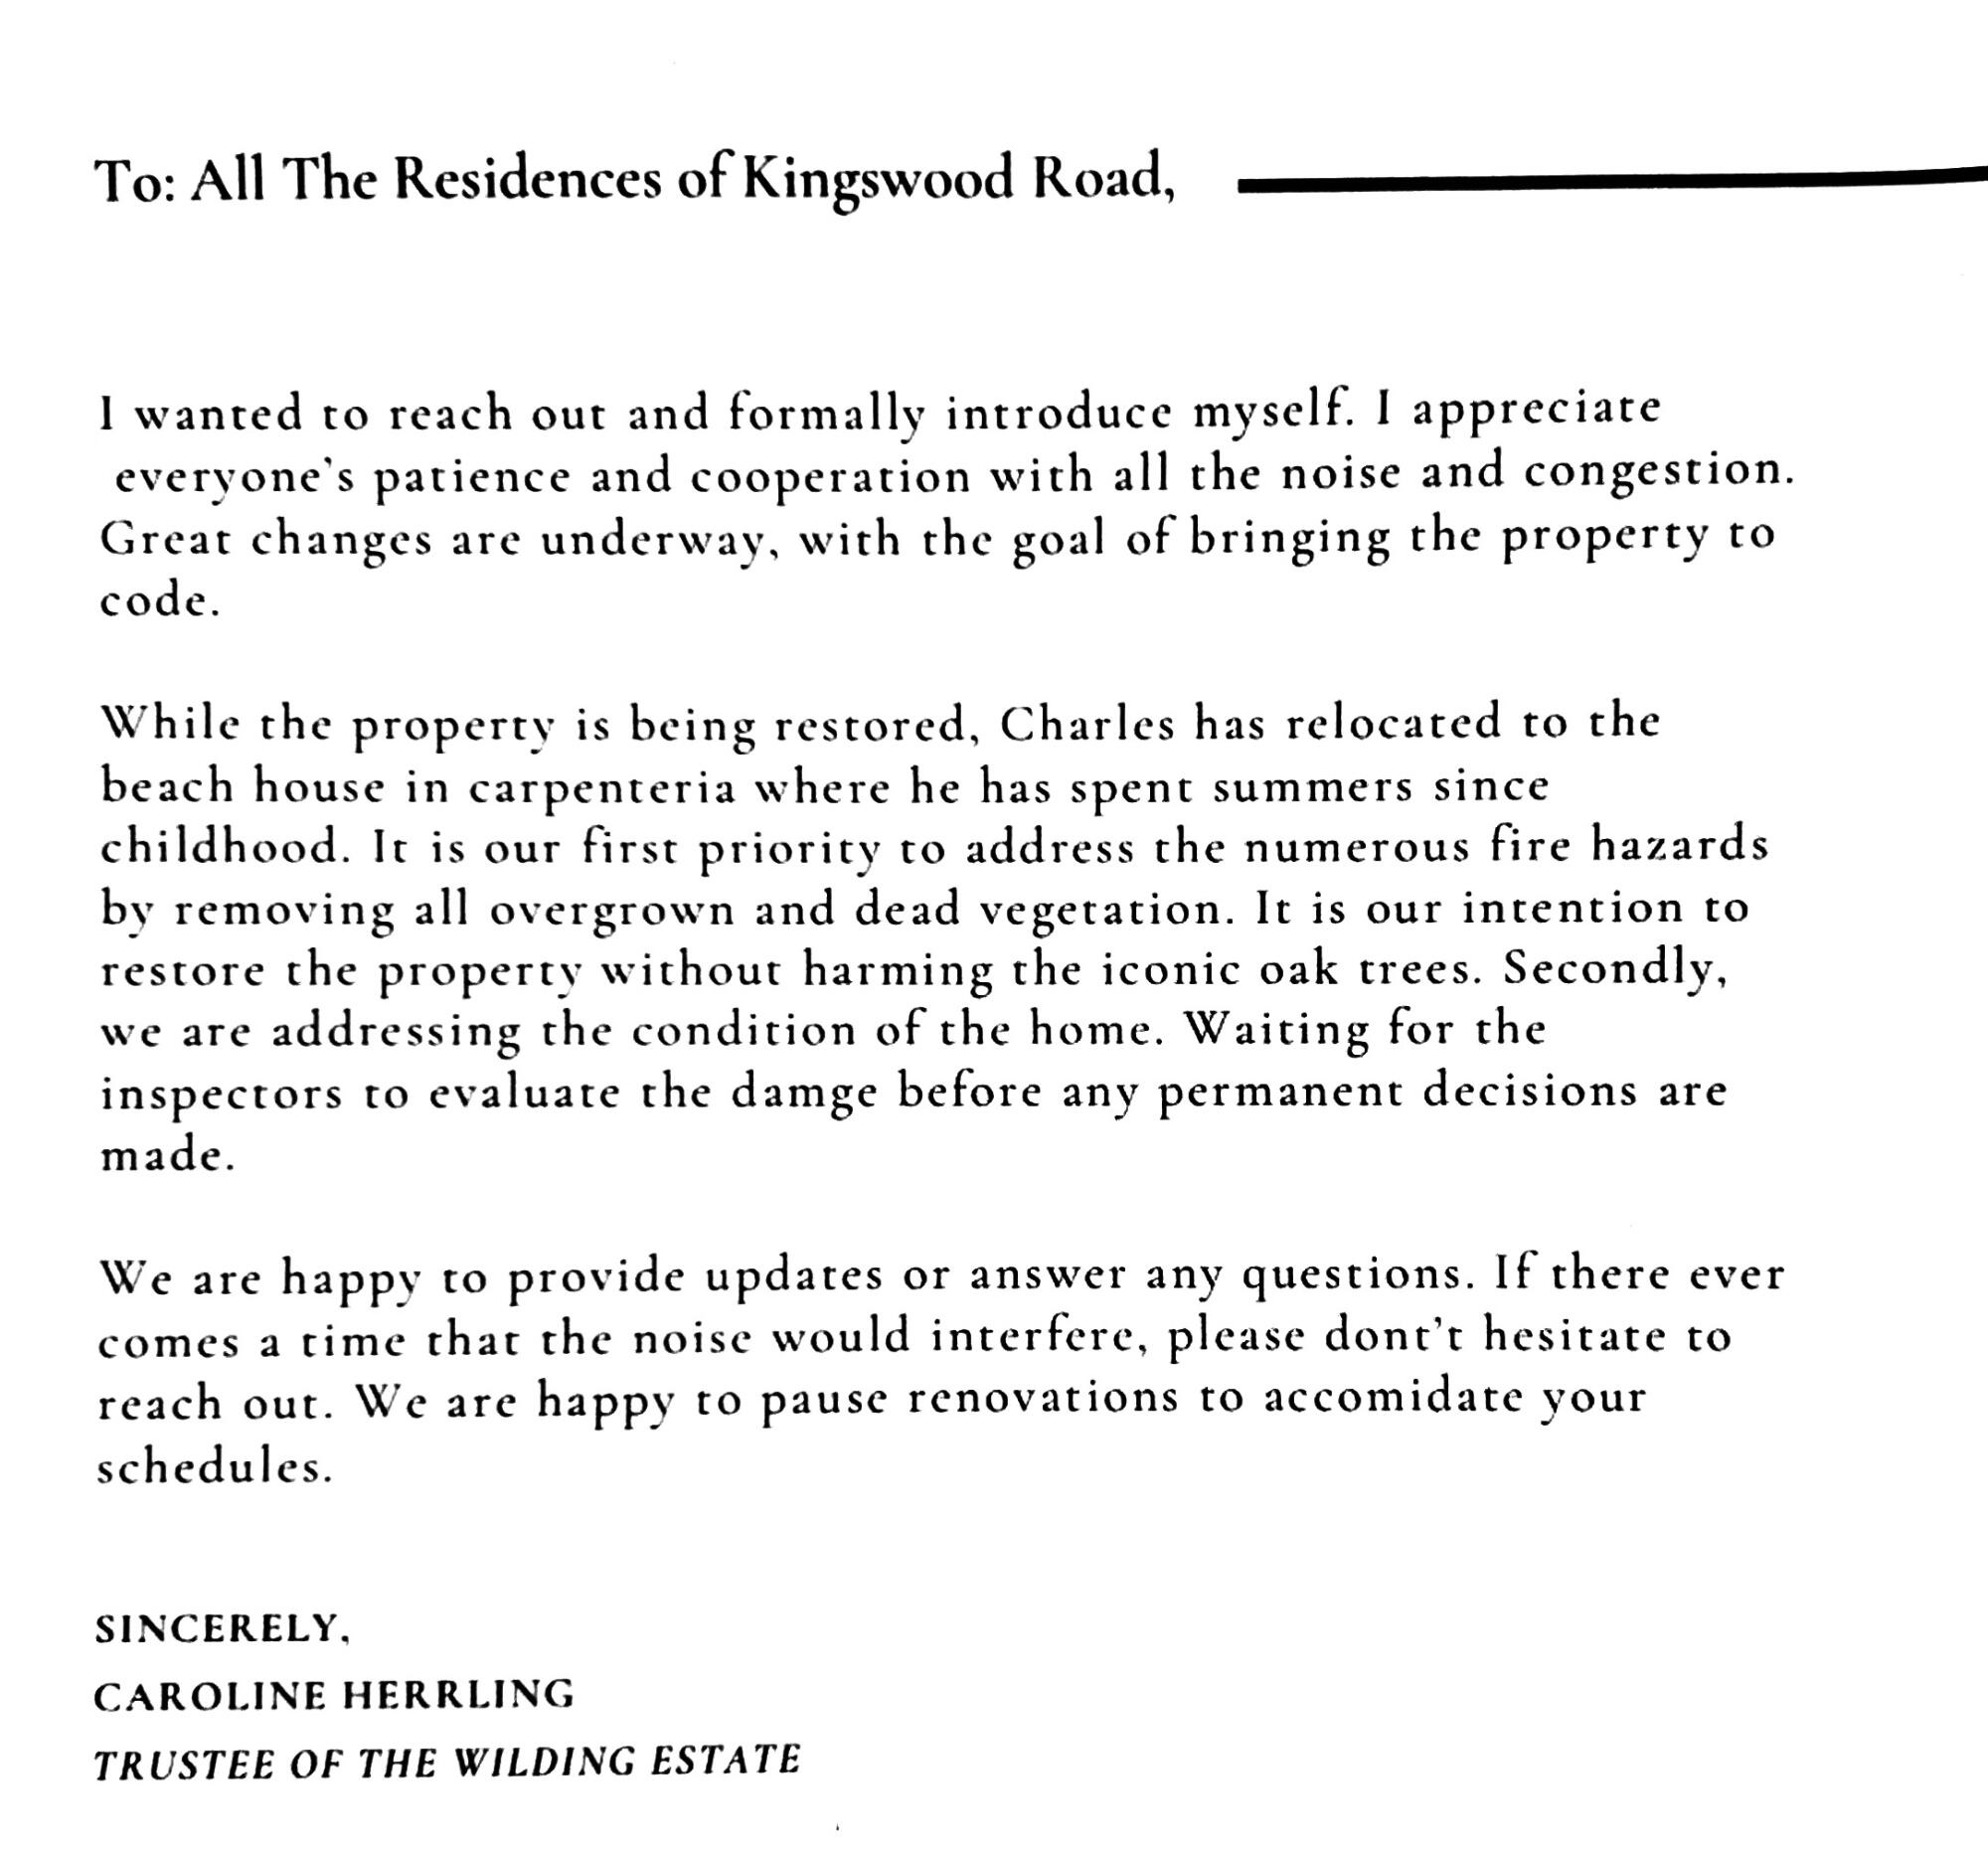 Text of a letter to neighbors from Caroline Herrling.